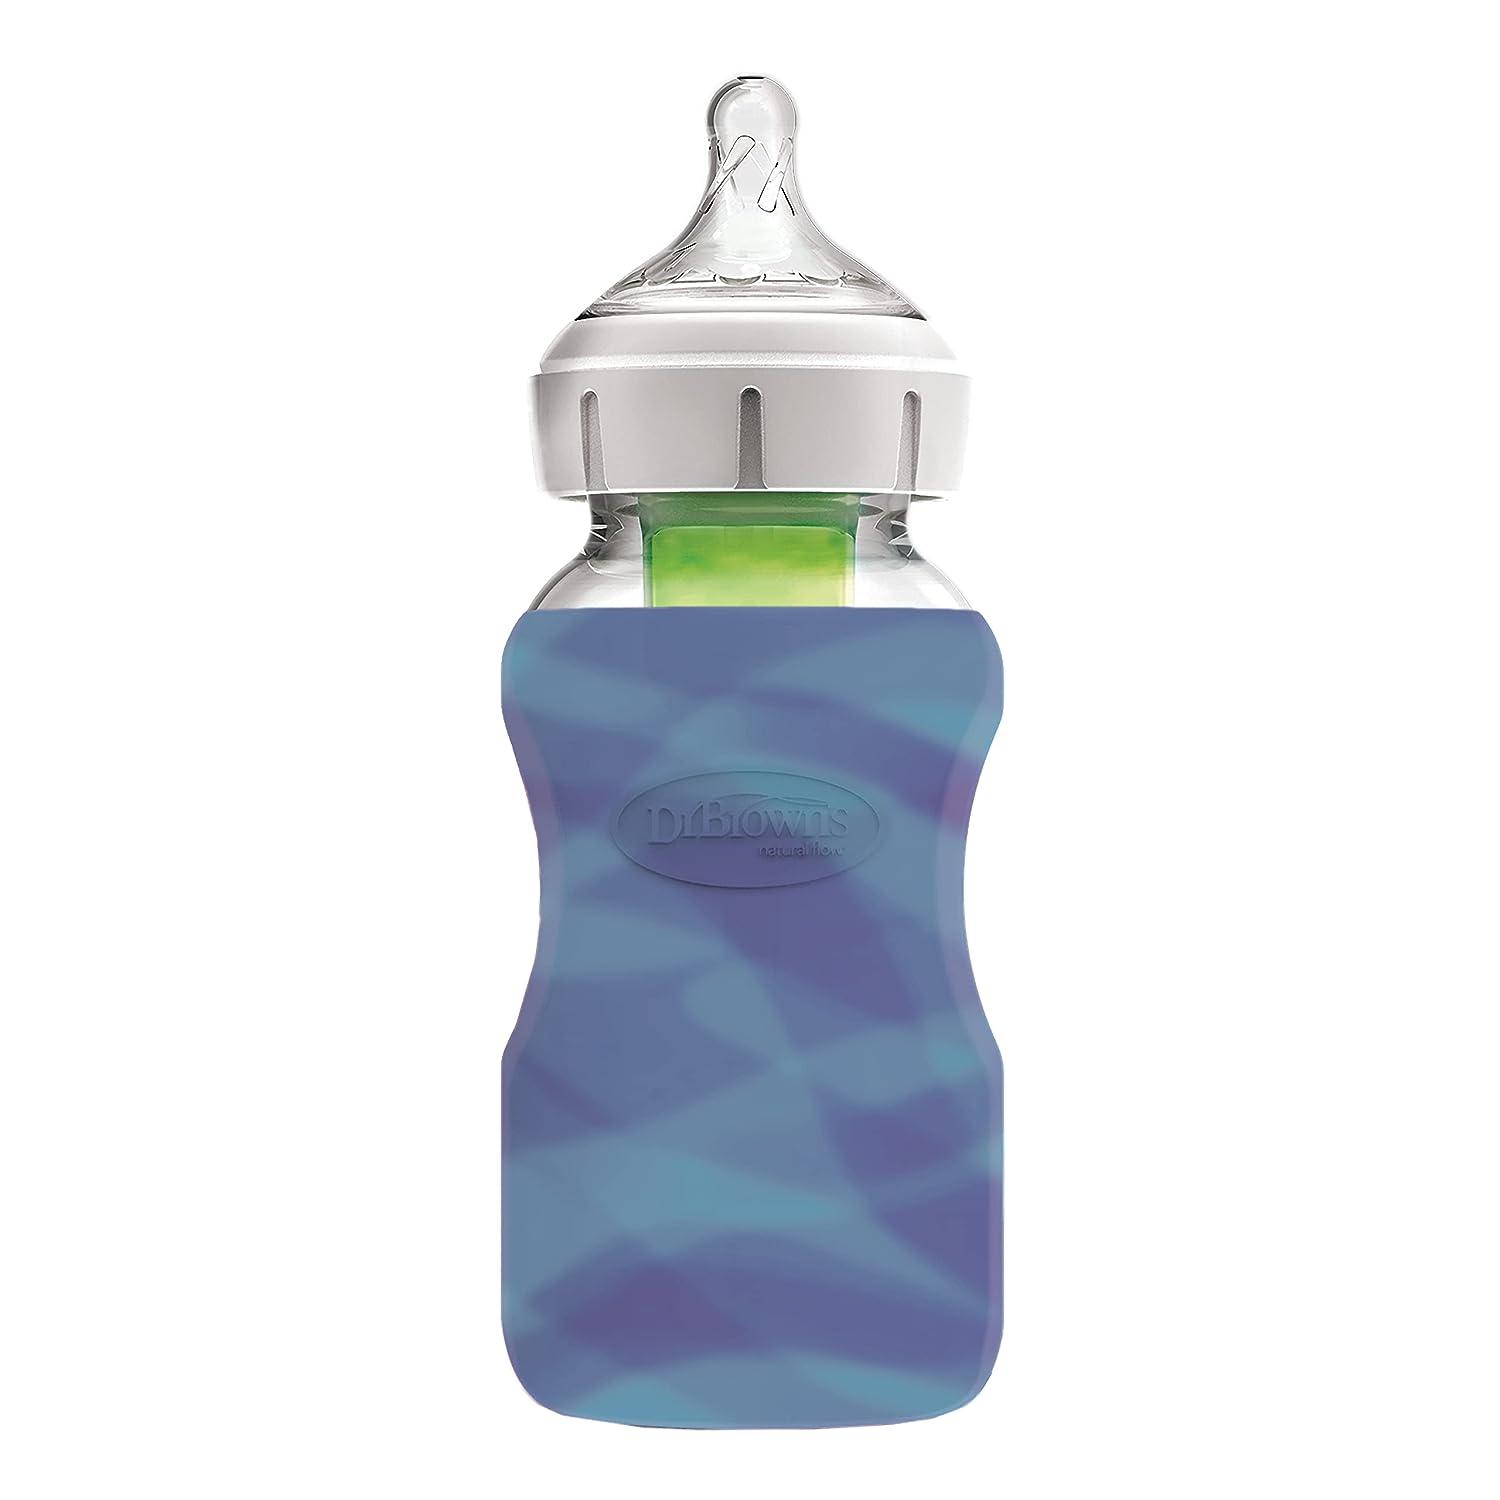 Dr. Brown's Natural Flow Options+ Glass Baby Bottle Sleeves,100% Silicone,5  oz,Wide-Neck,Mint